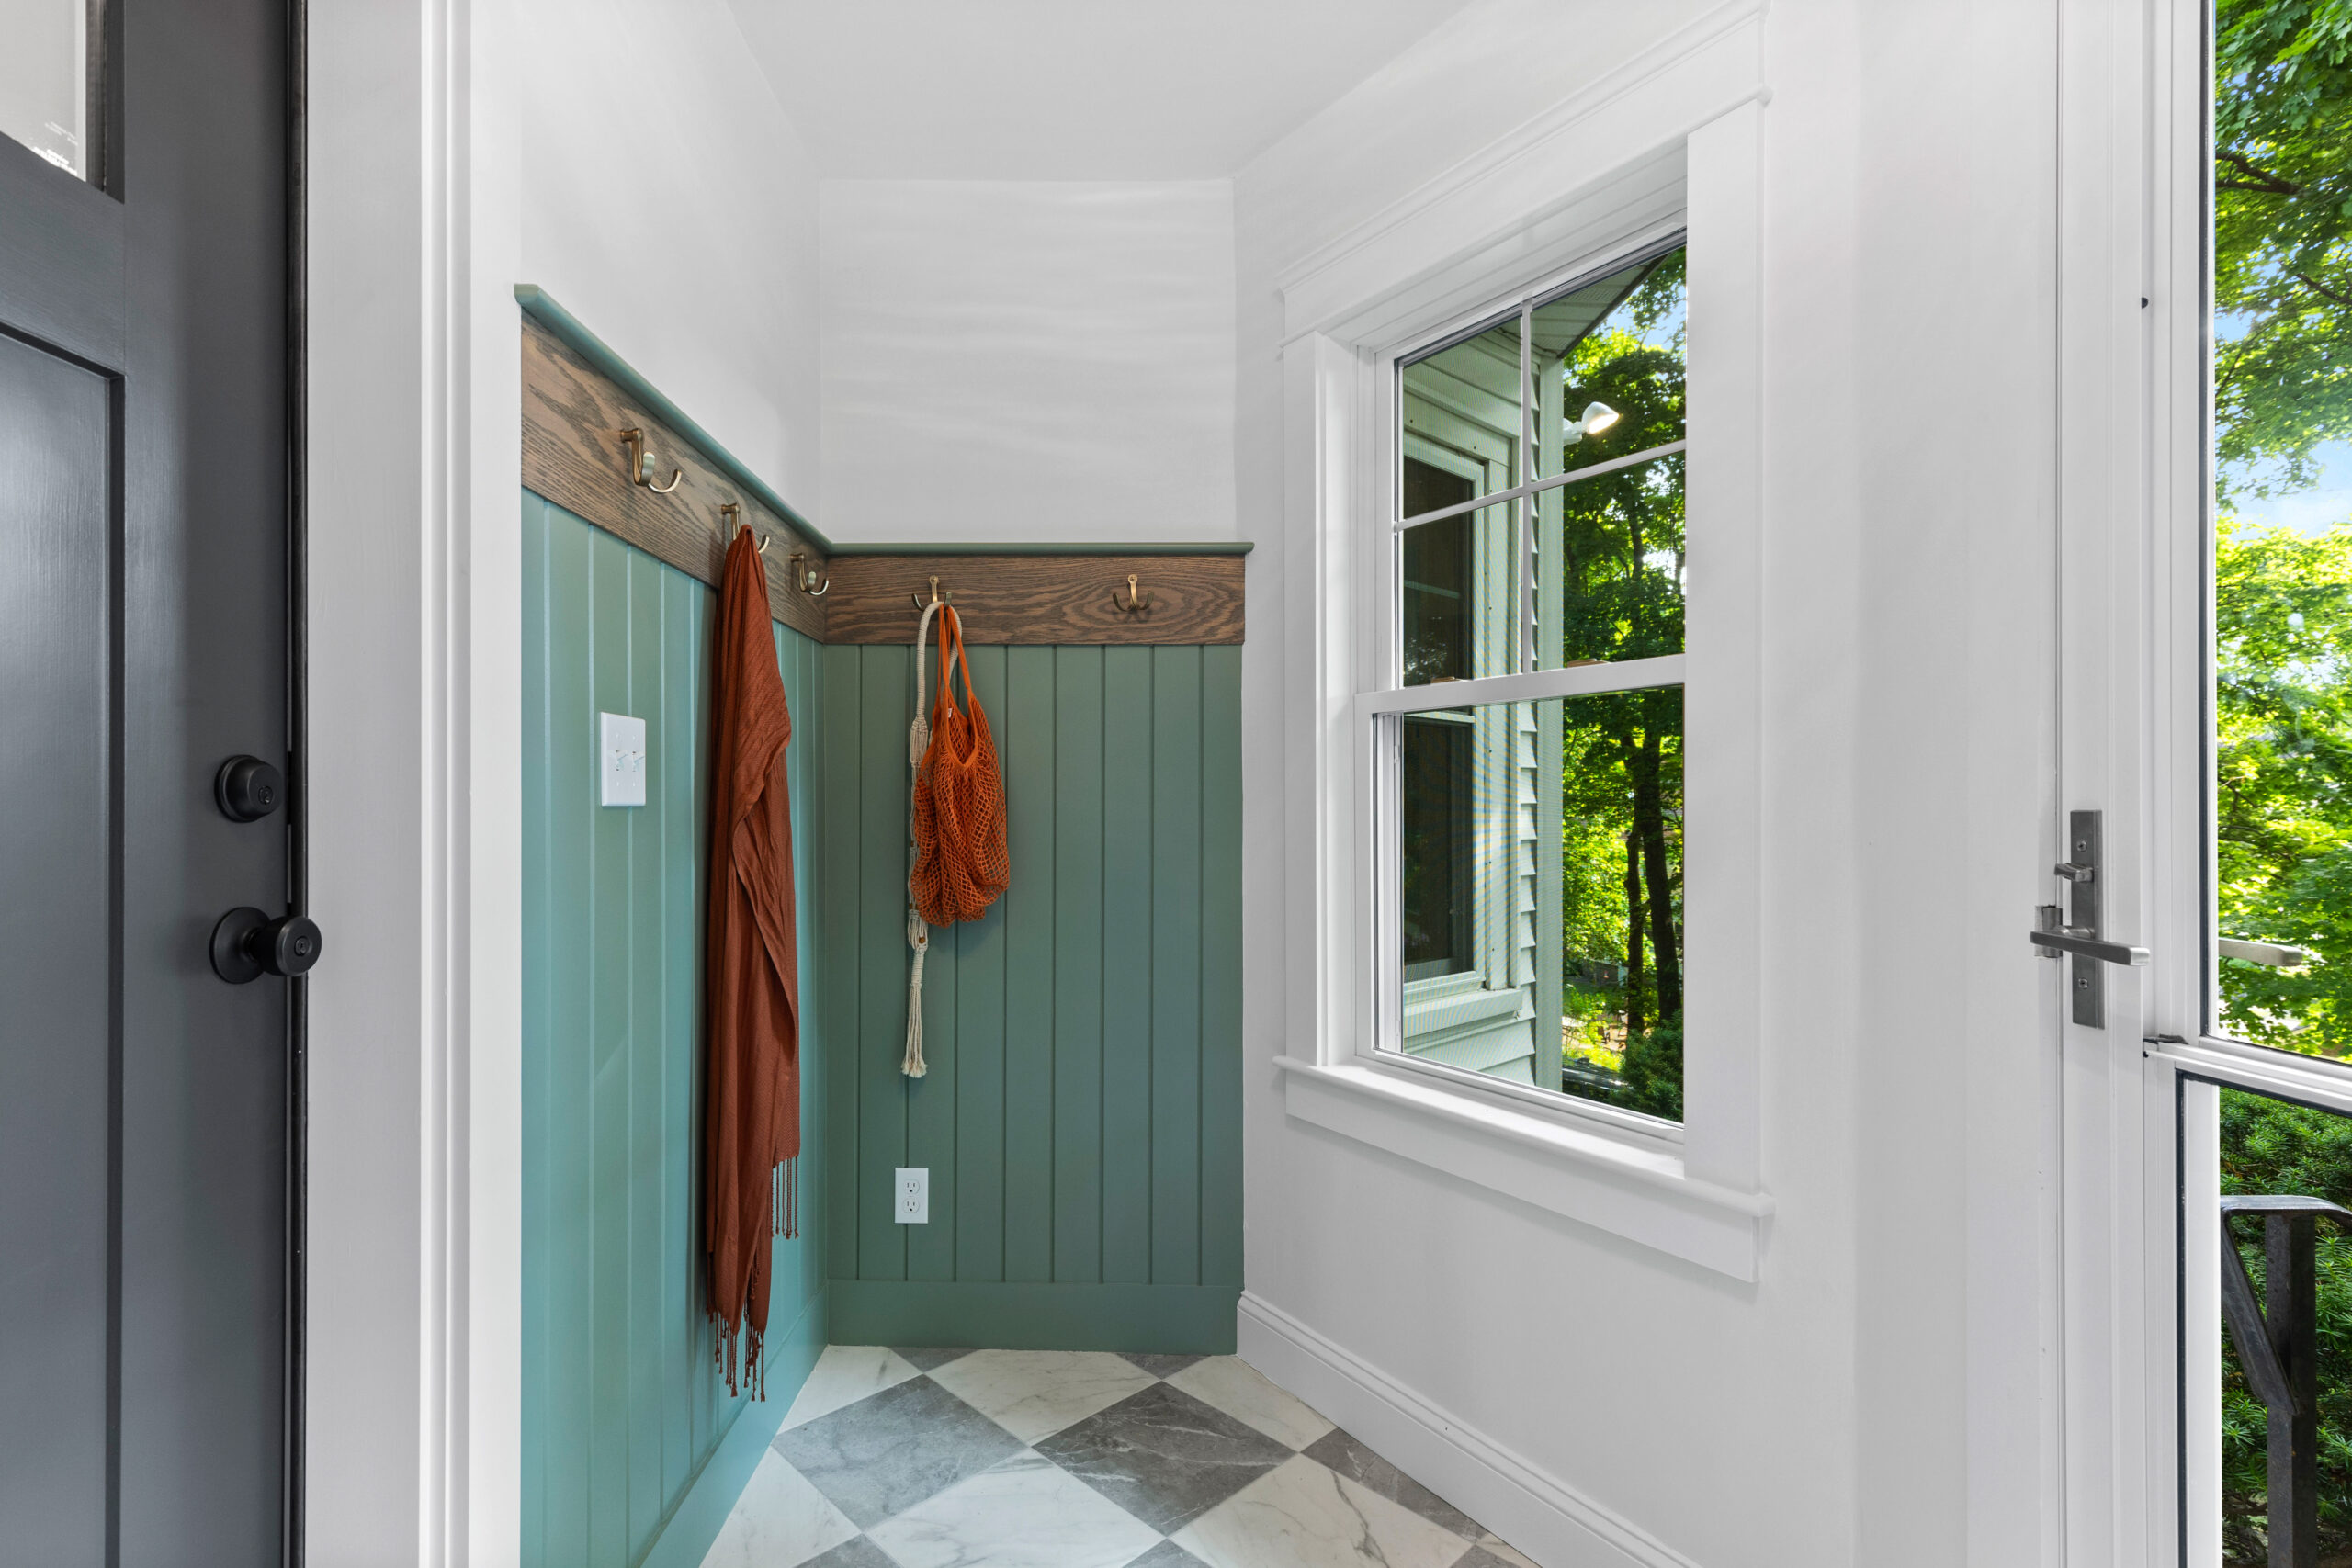 Image of a newly renovated mudroom featuring Sherwin Williams Jade Dragon paint on the wainscoting. The space includes elegant wooden hooks for hanging items, with an accent of natural wood trim. The checkerboard marble floor adds a touch of luxury, and a large window floods the room with natural light, highlighting the stylish and functional design.